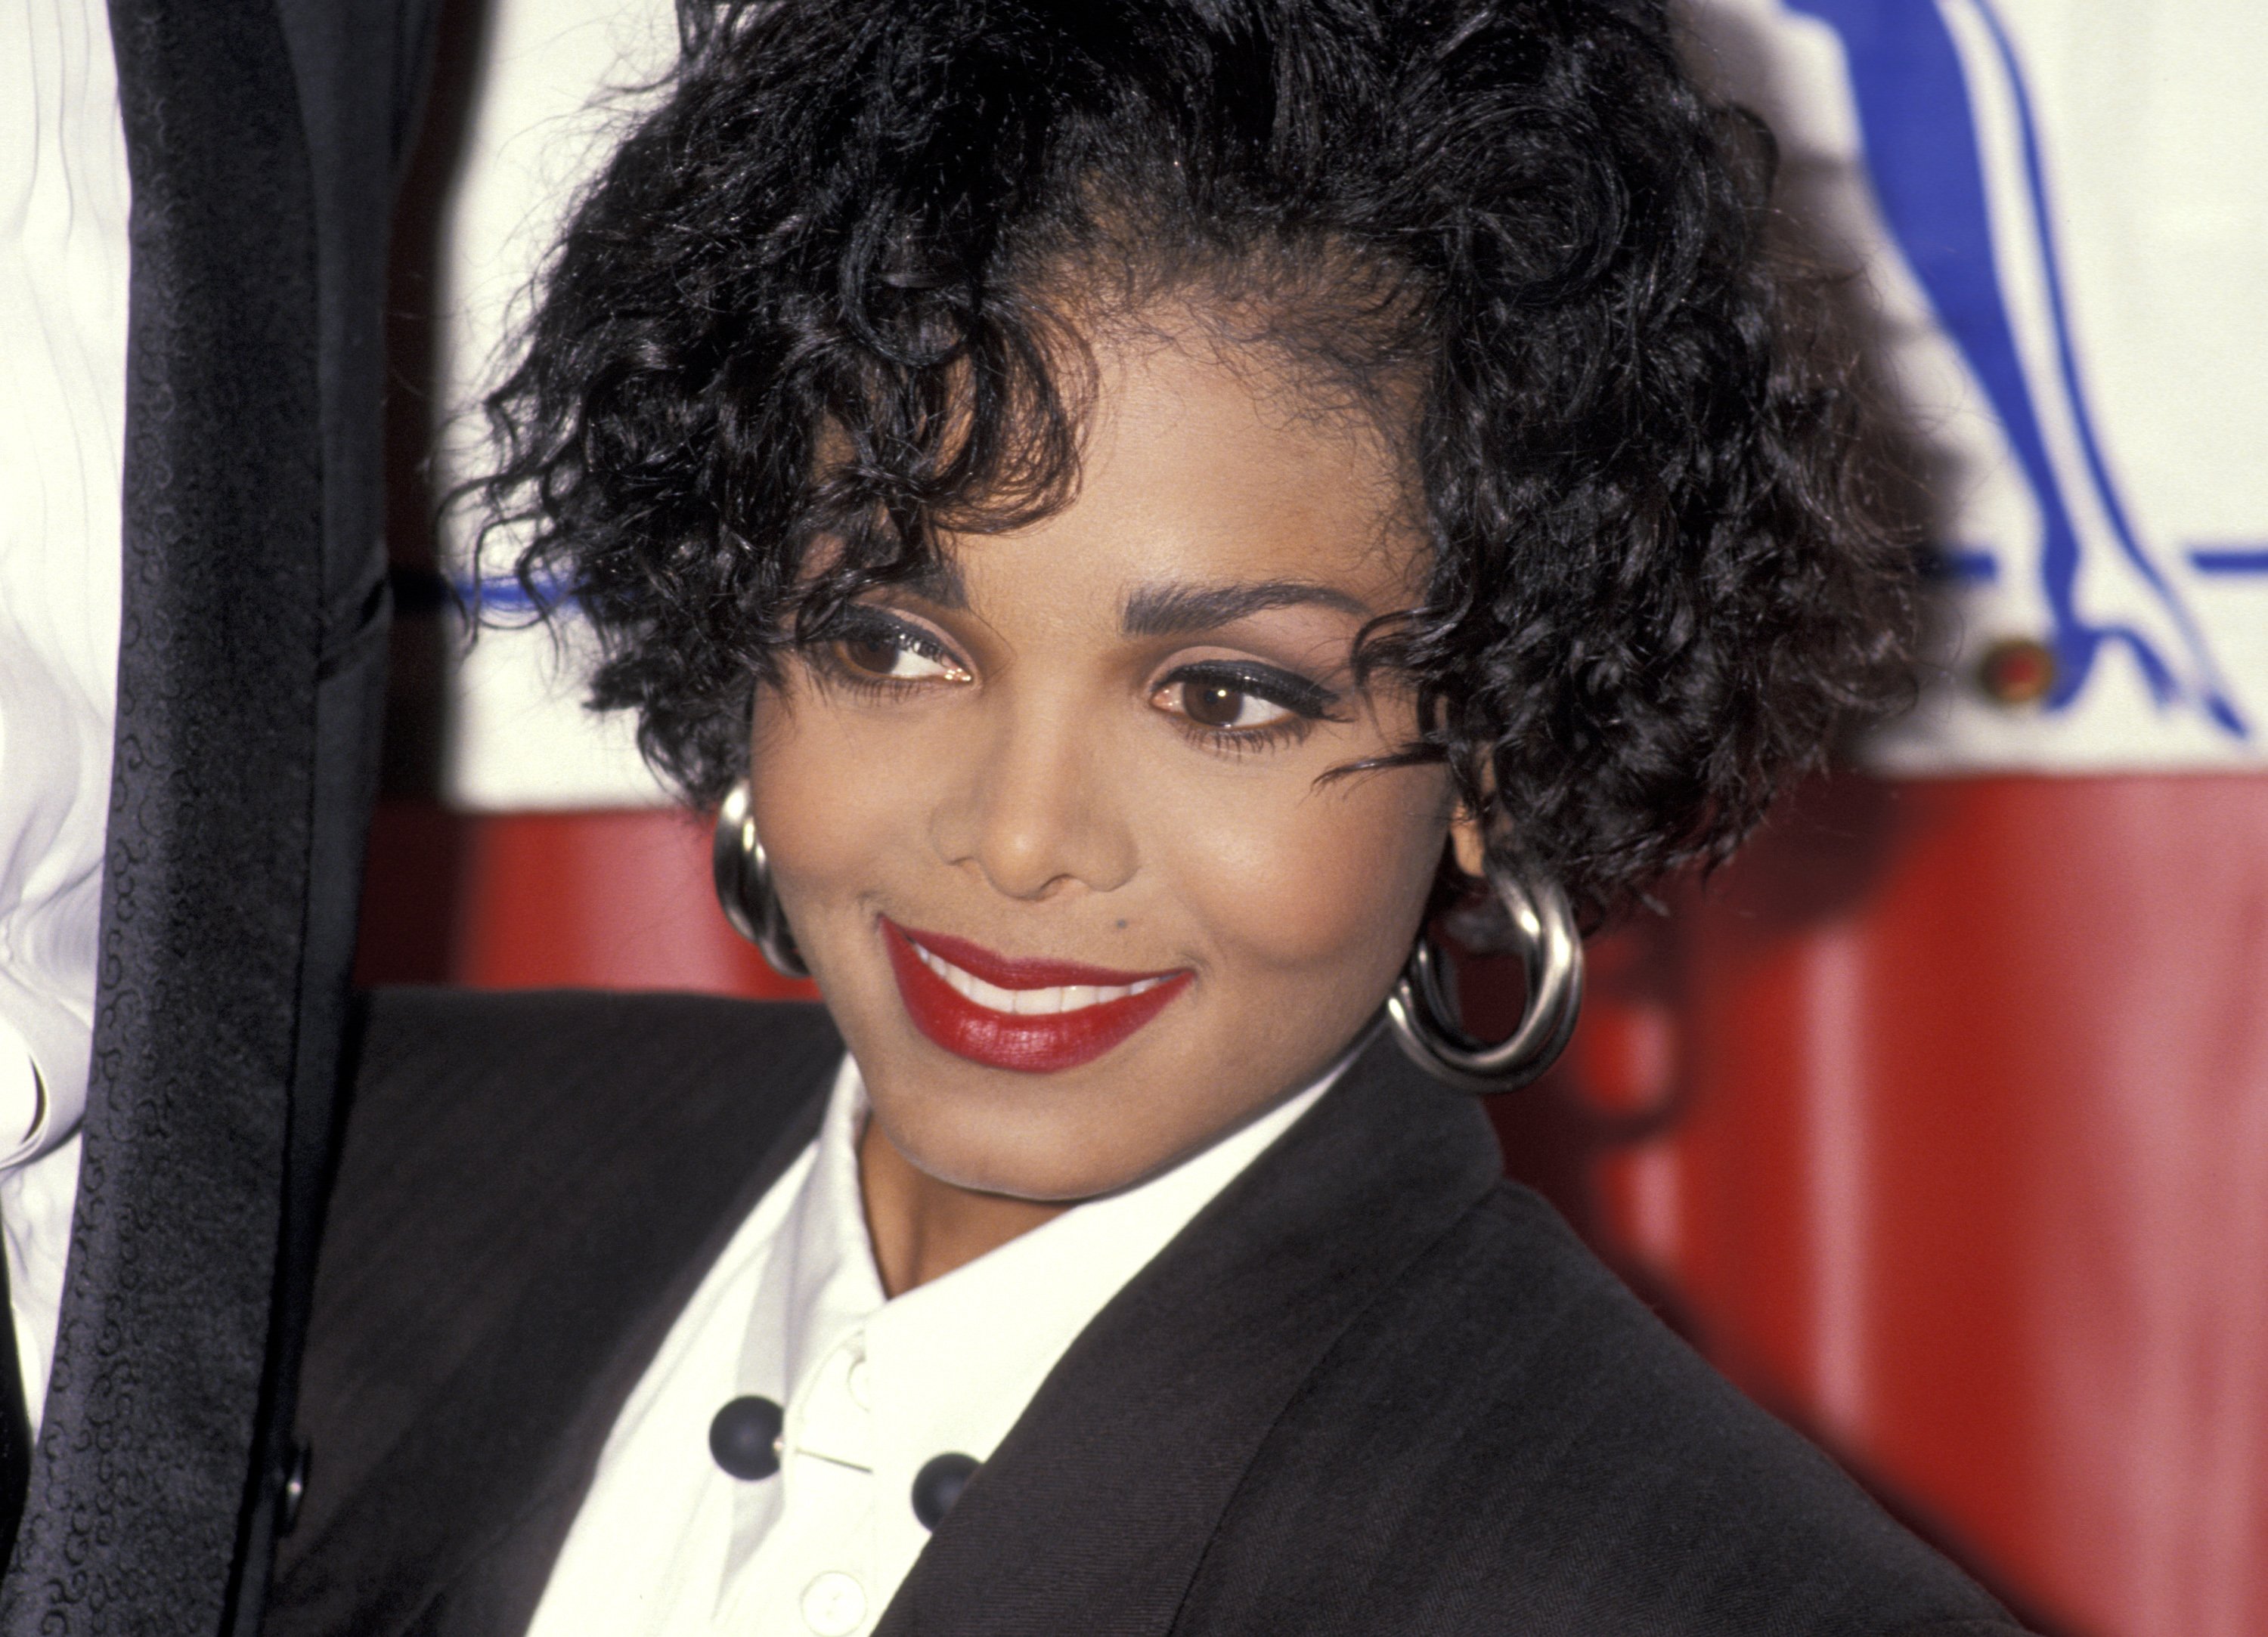 Janet Jackson wearing a suit